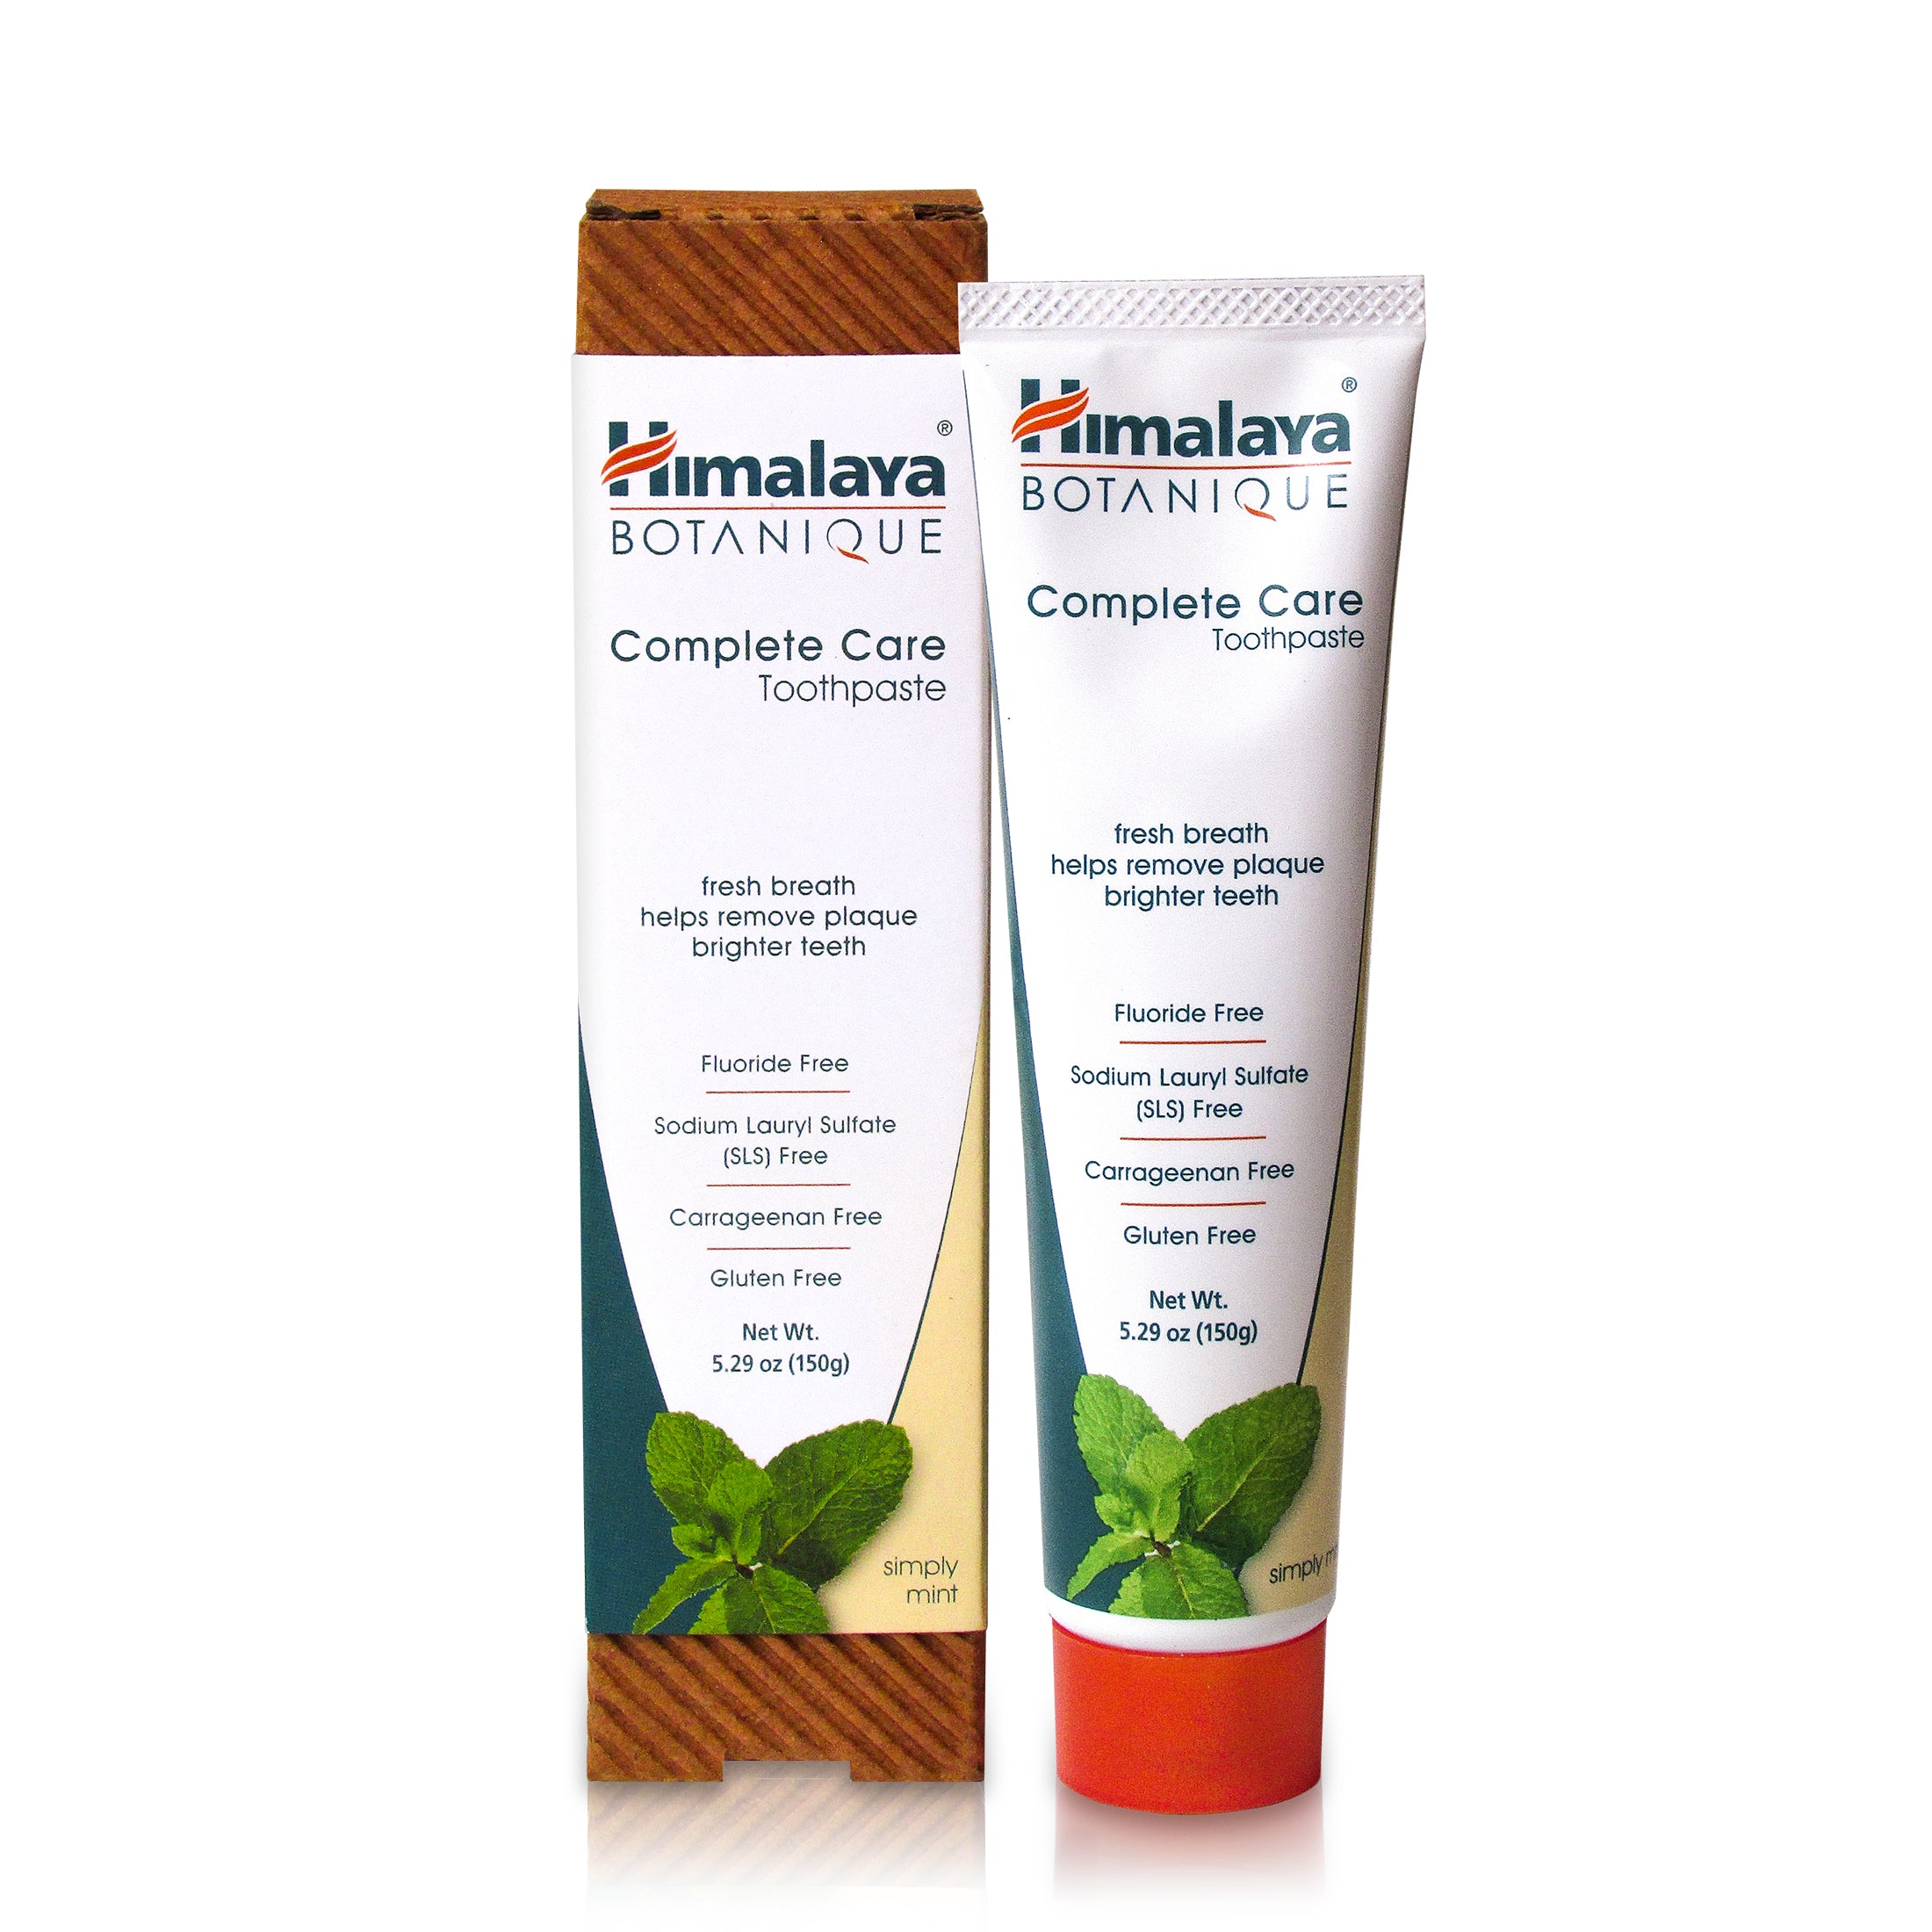 Himalaya Botanique Complete Care Toothpaste Mint